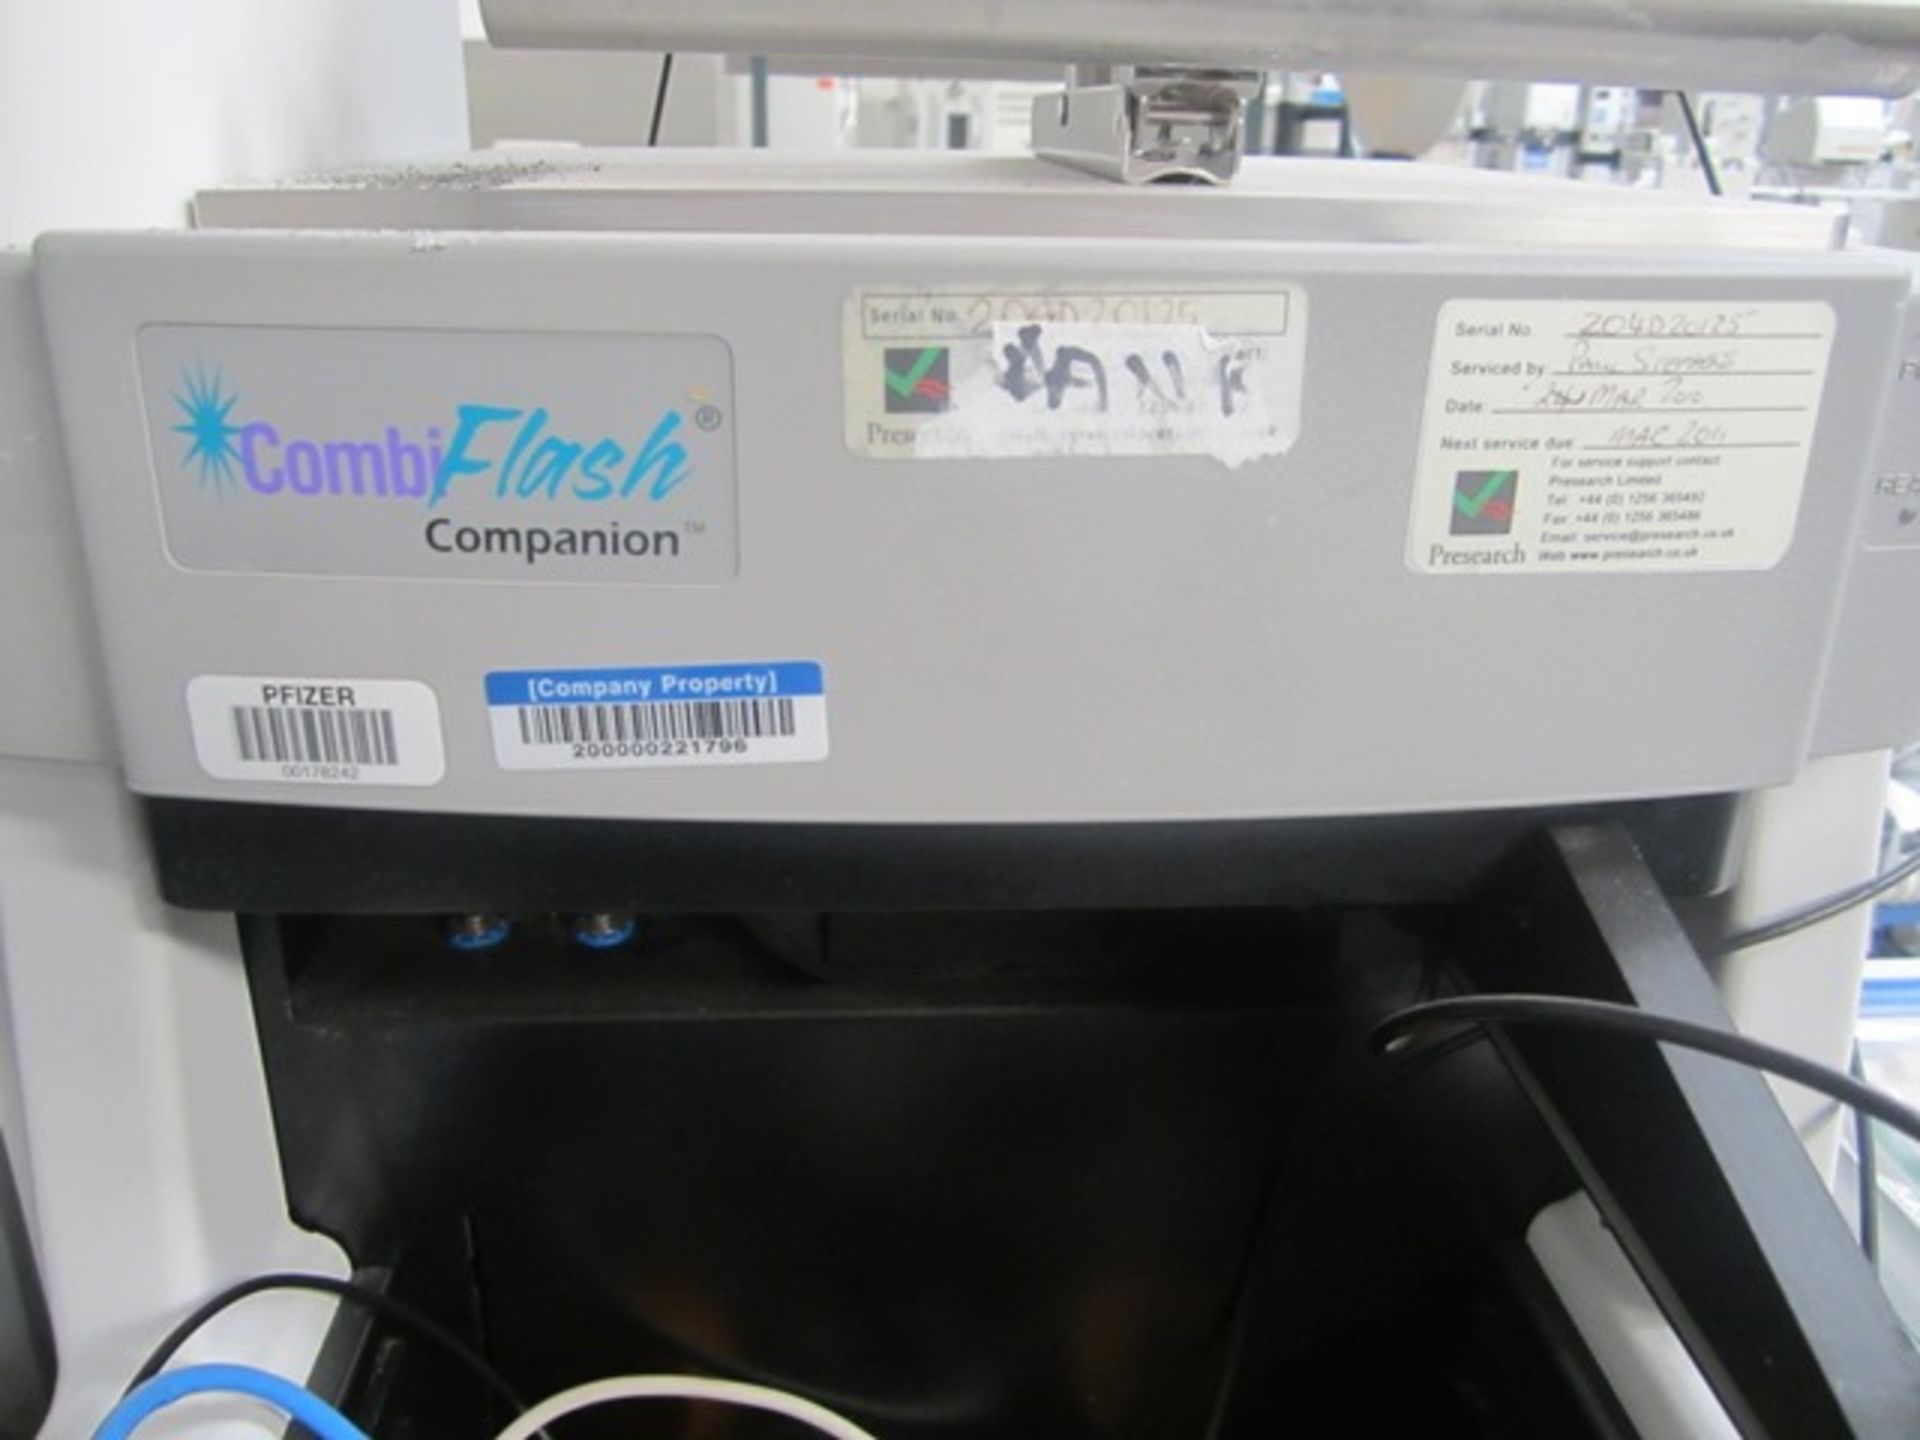 Teledyne Isco Combiflash companion purification system, serial number 204D20125 (height 750mm x - Image 2 of 4